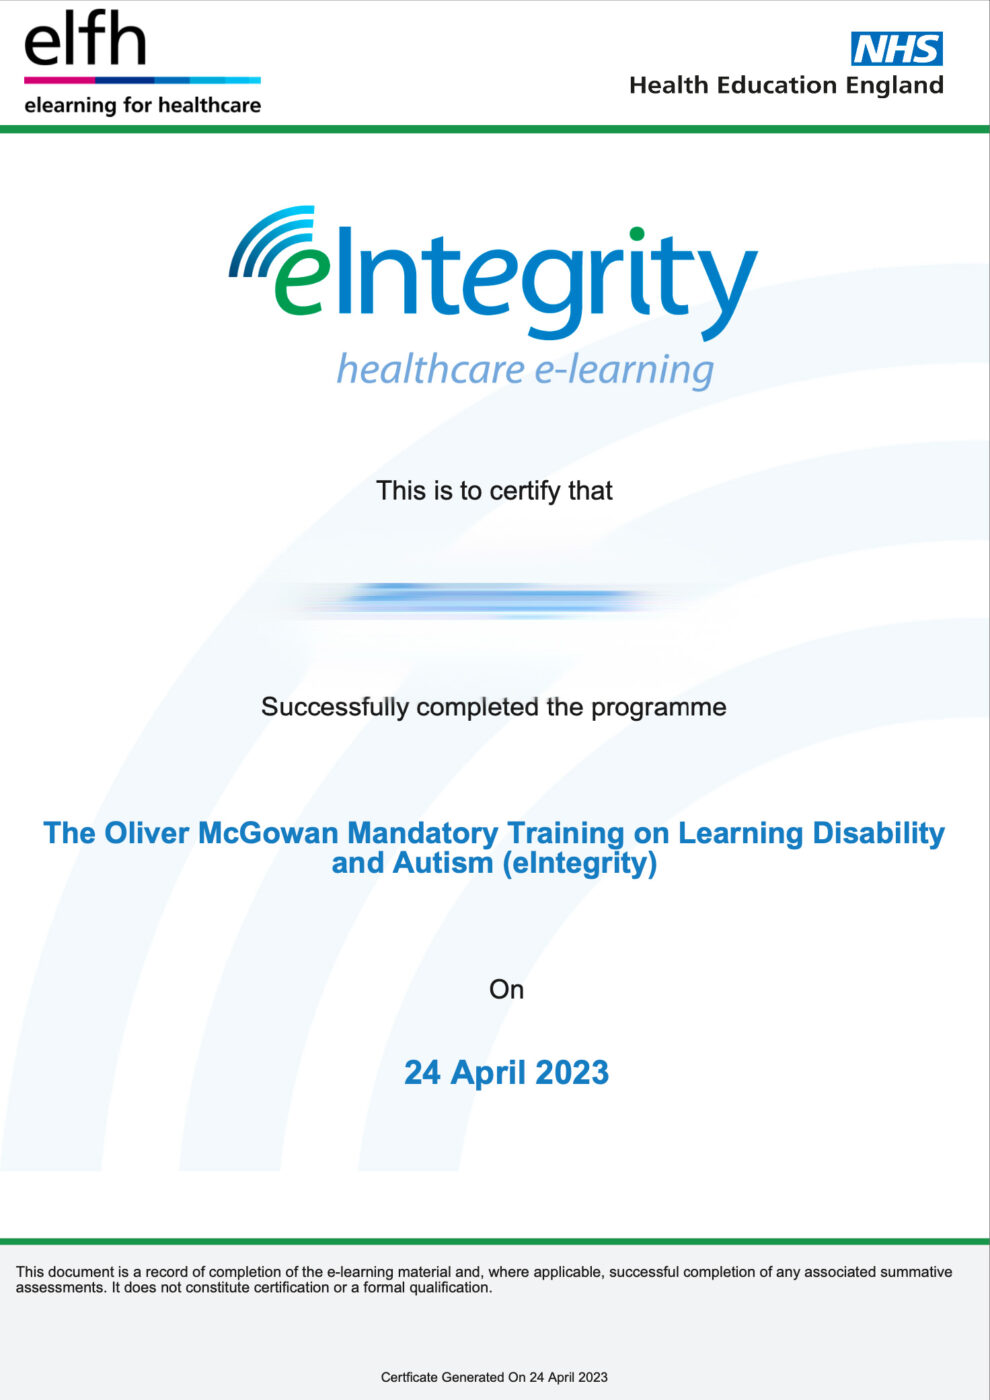 The Oliver McGowan Mandatory Training on Learning Disability and Autism Certificate